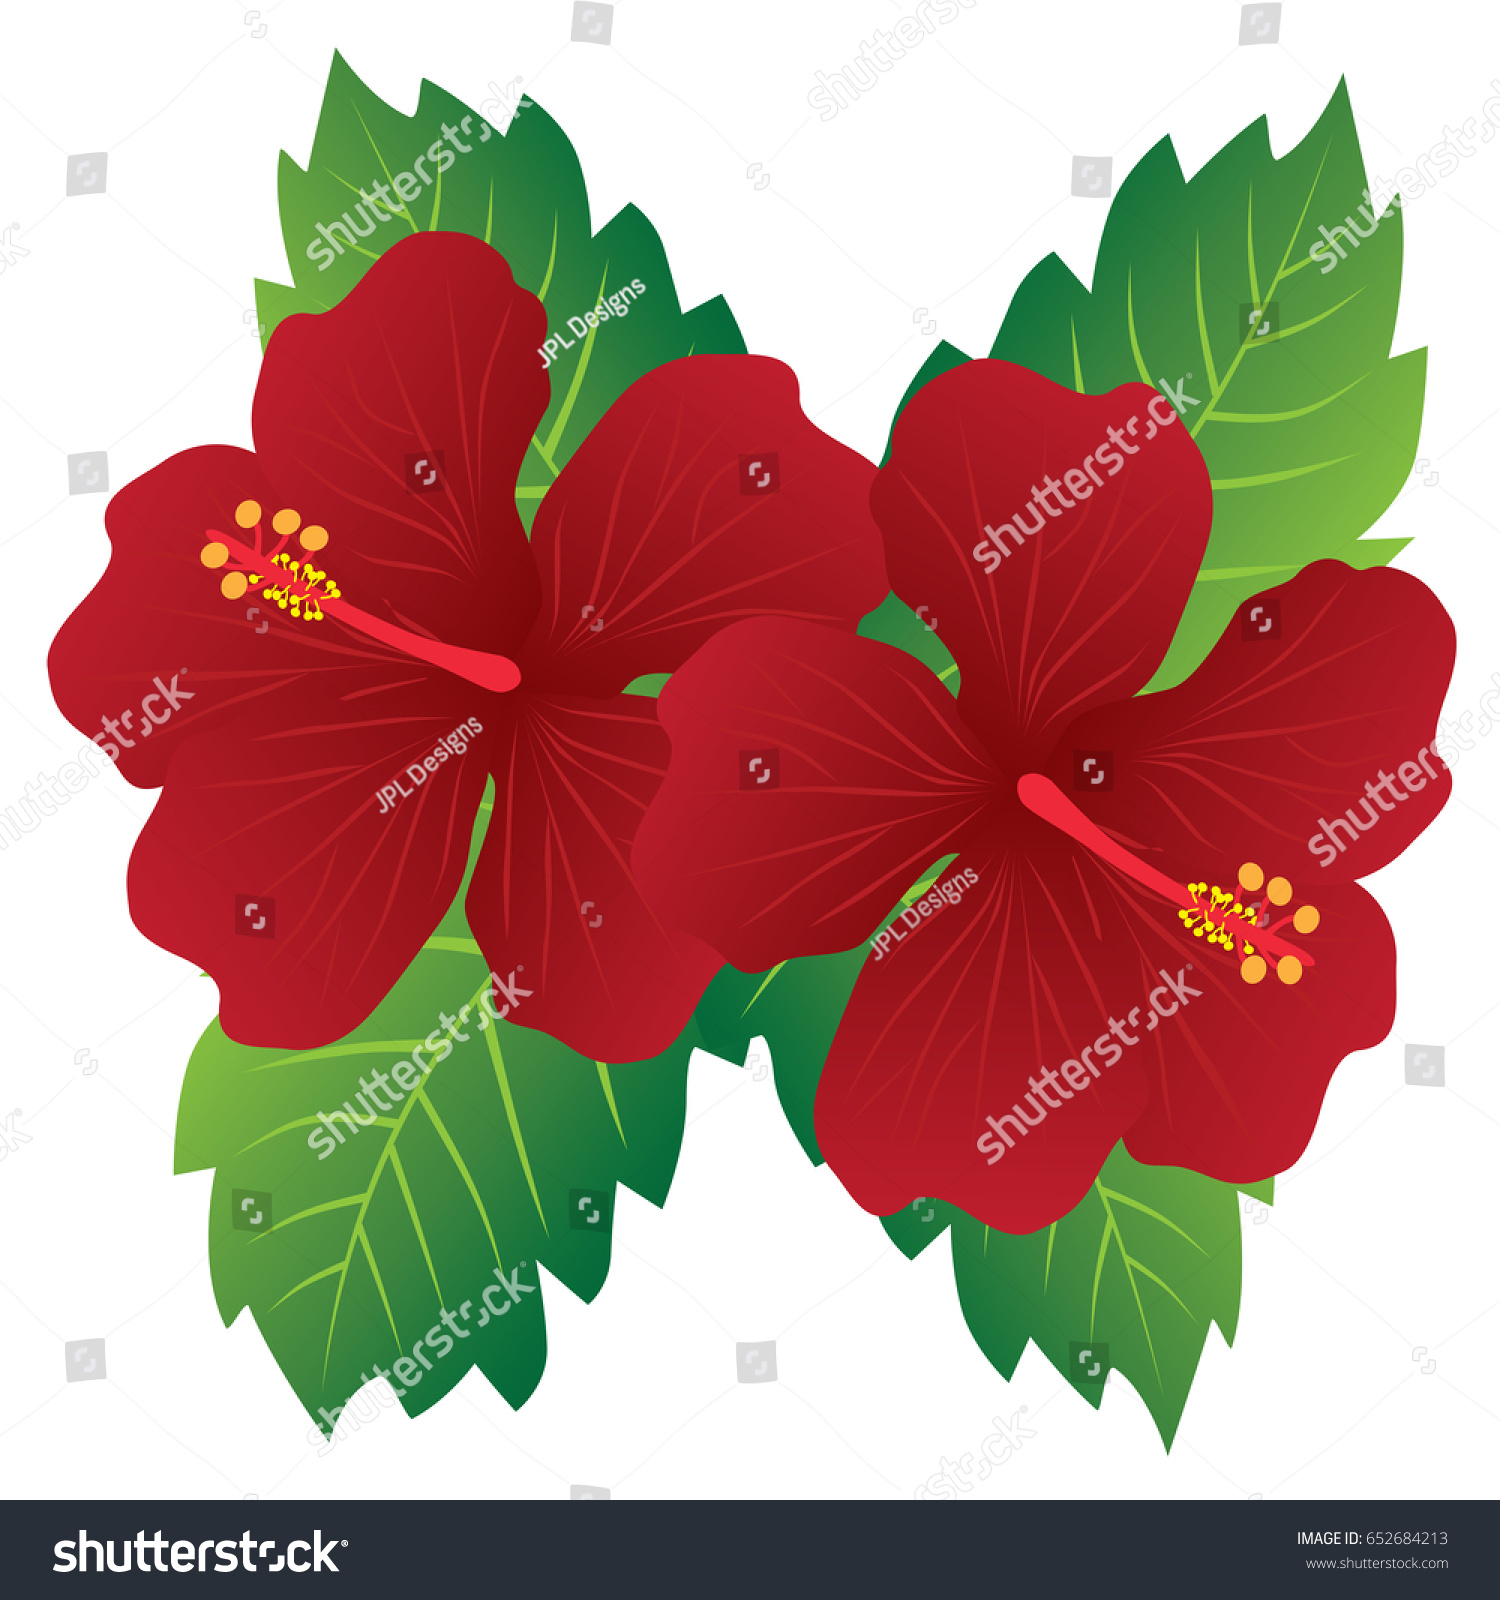 Malaysia National Flower Red Hibiscus Flowers Stock Vector Royalty Free Shutterstock